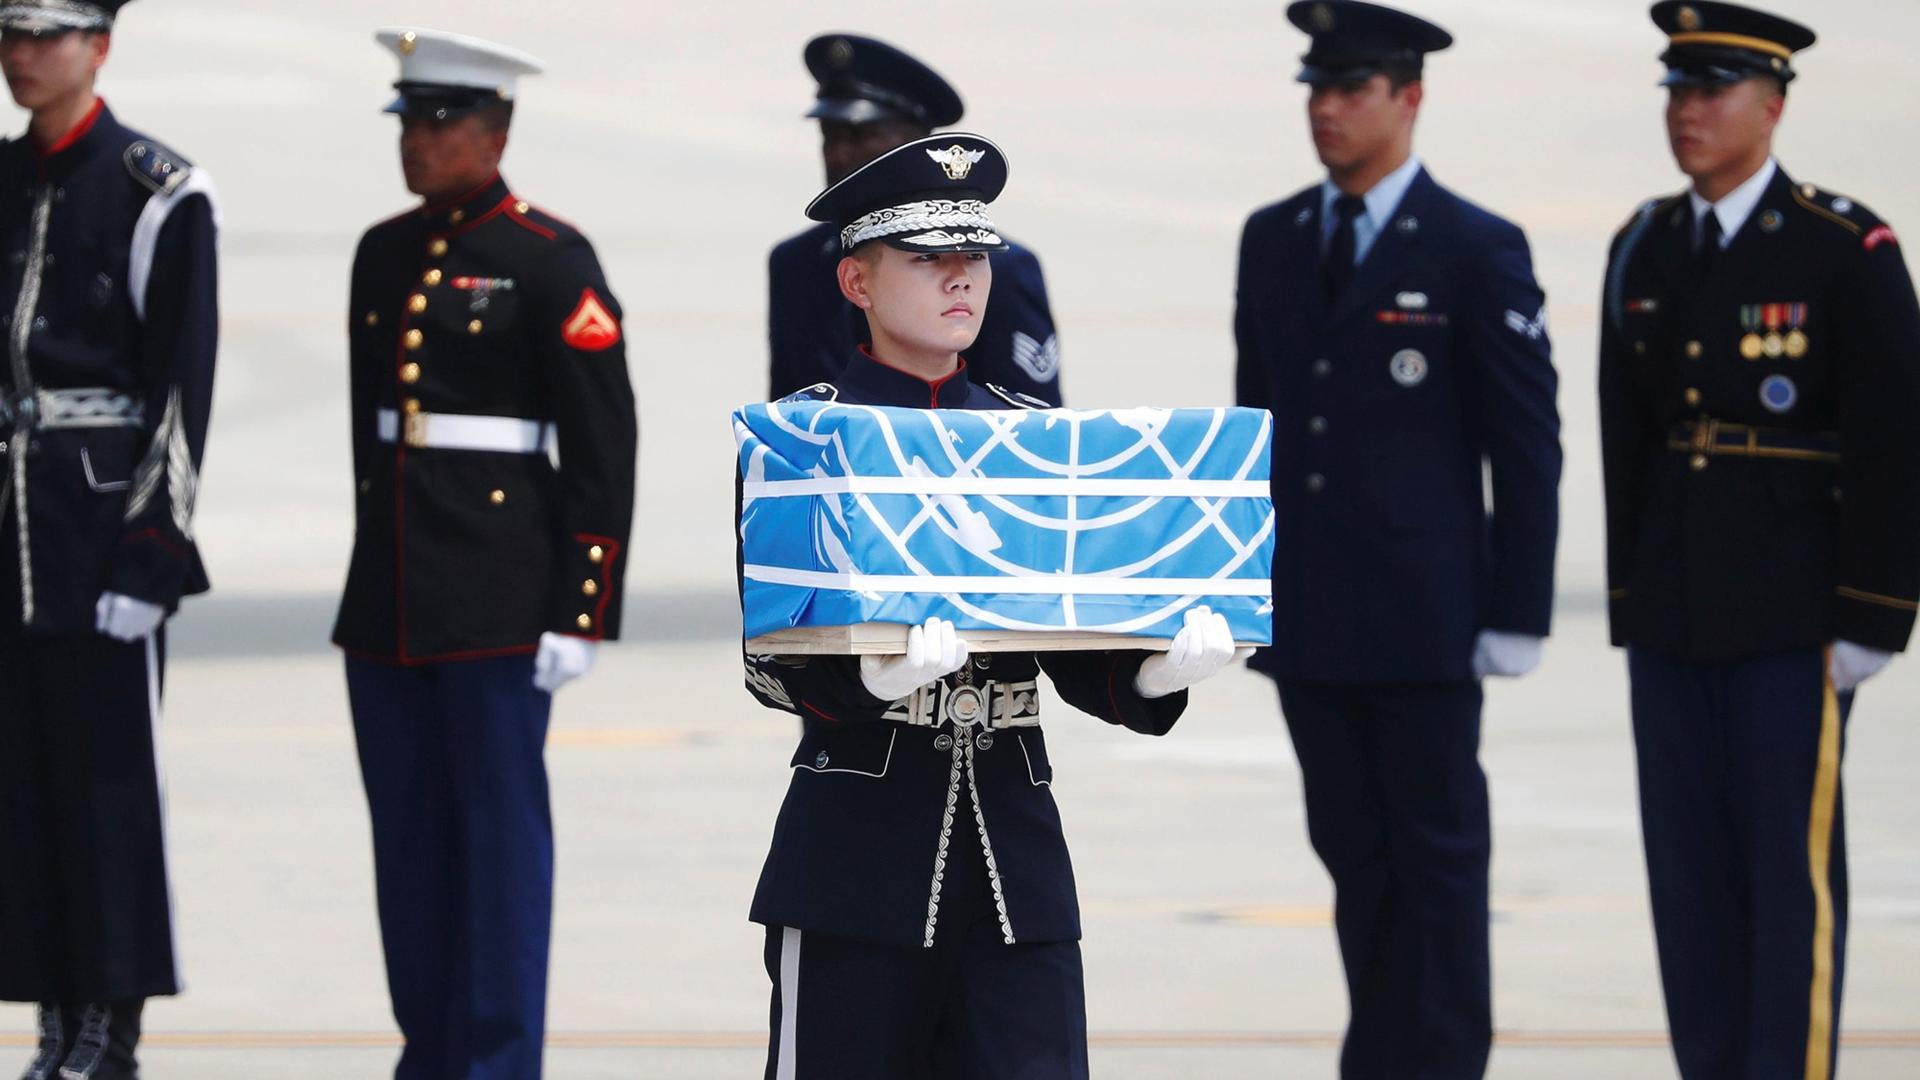 A uniformed soldier carries a casket containing the remains of a US soldier draped in a blue flag.